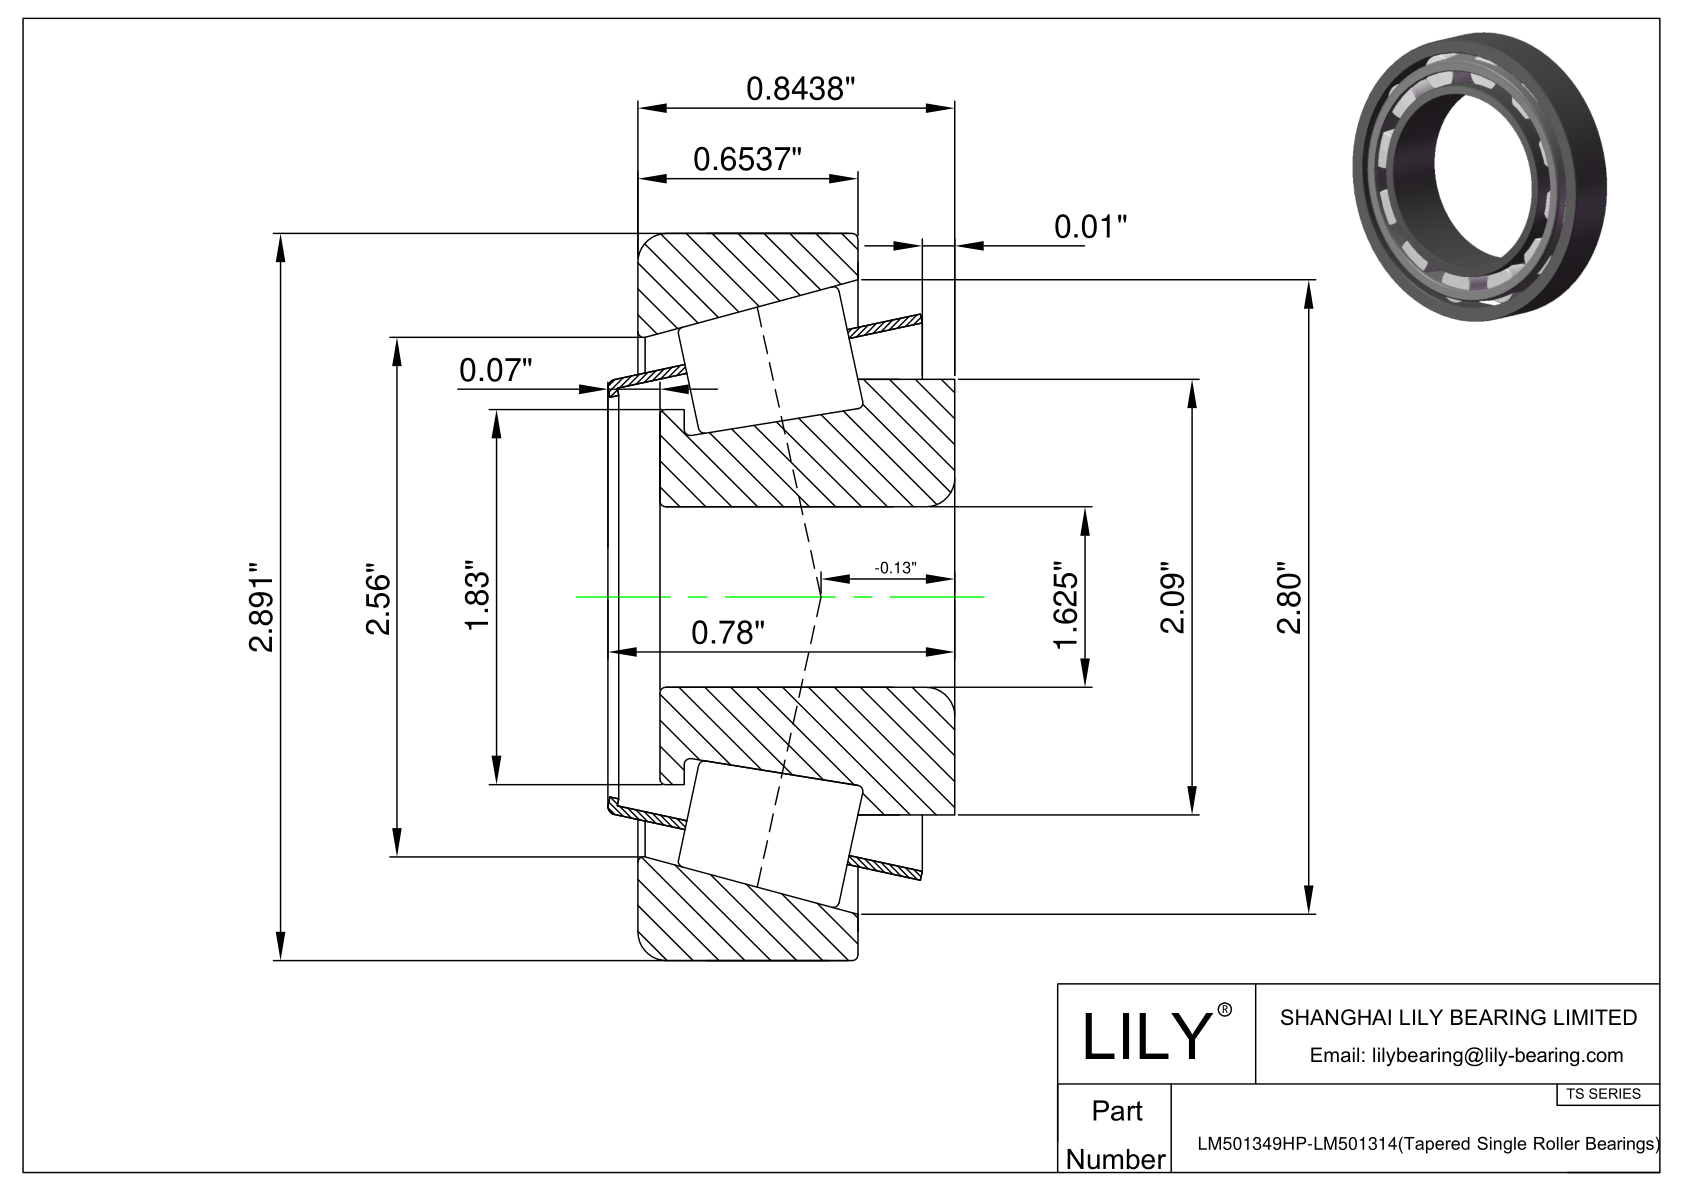 LM501349HP-LM501314 TS (Tapered Single Roller Bearings) (Imperial) cad drawing